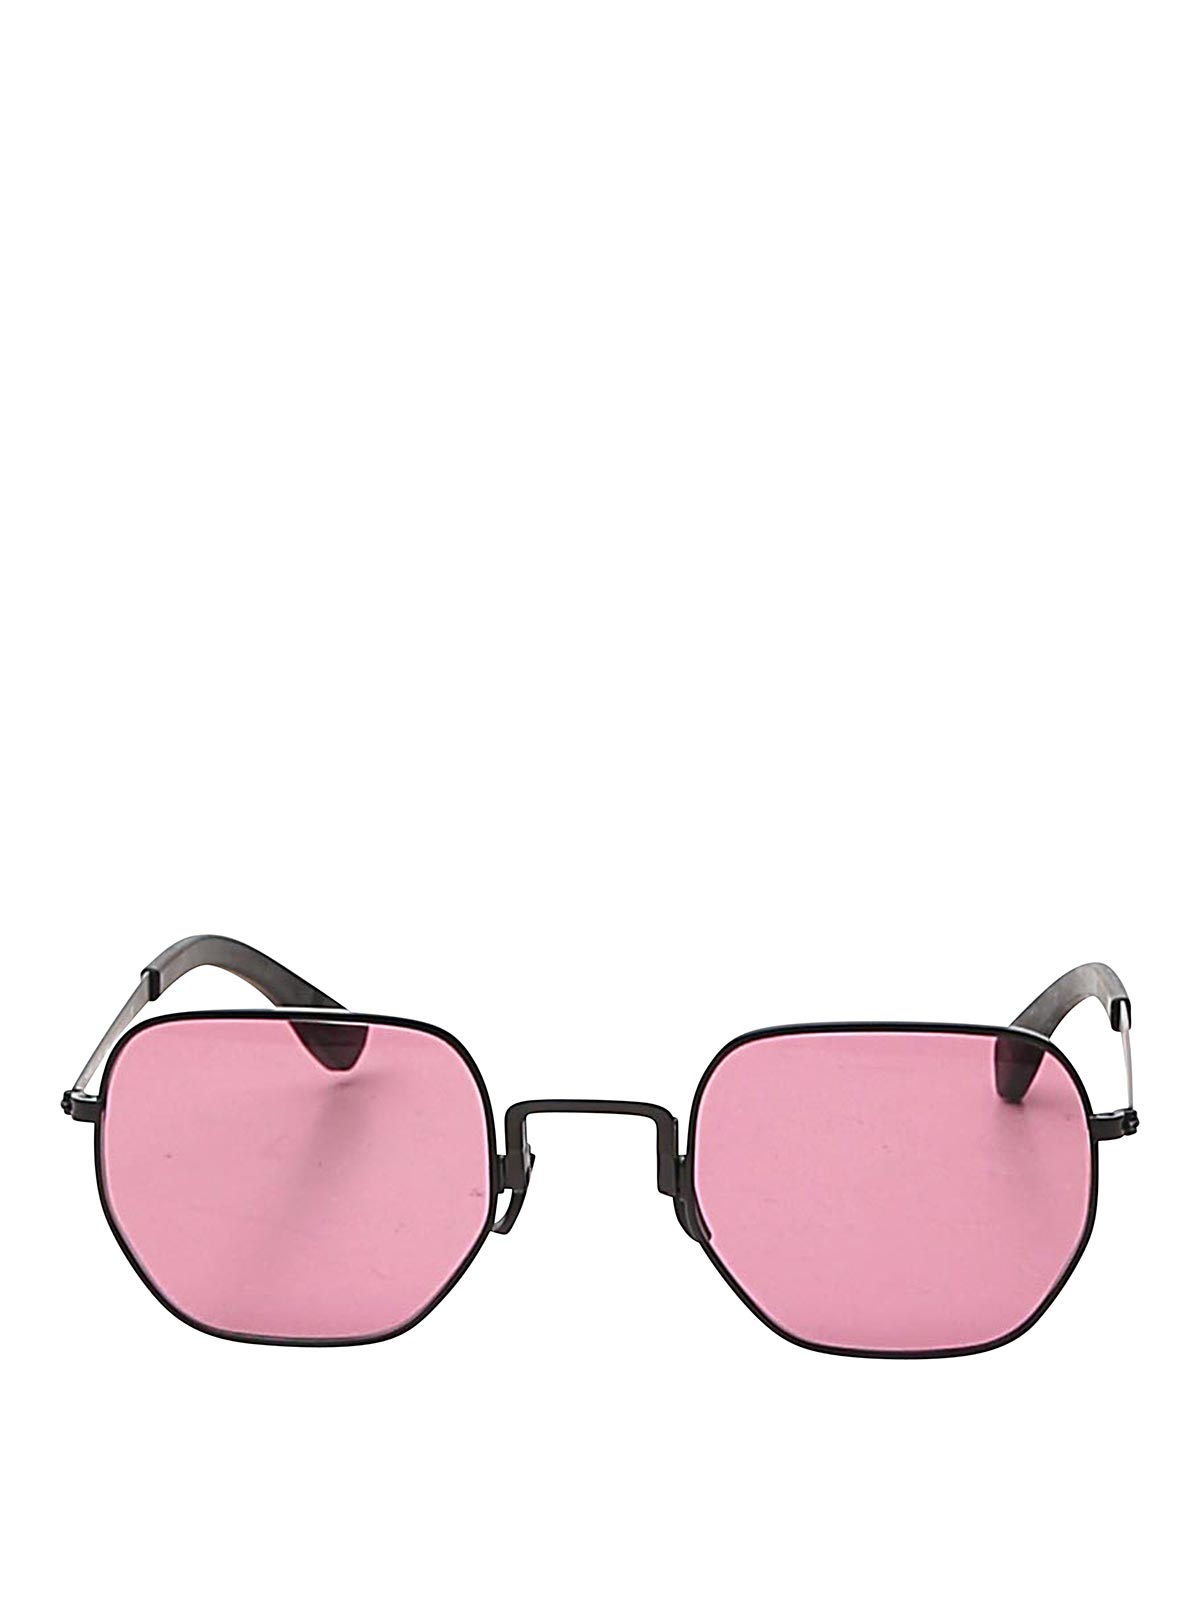 Movitra Sunglasses In Matte Black With Wine Lenses In Pink